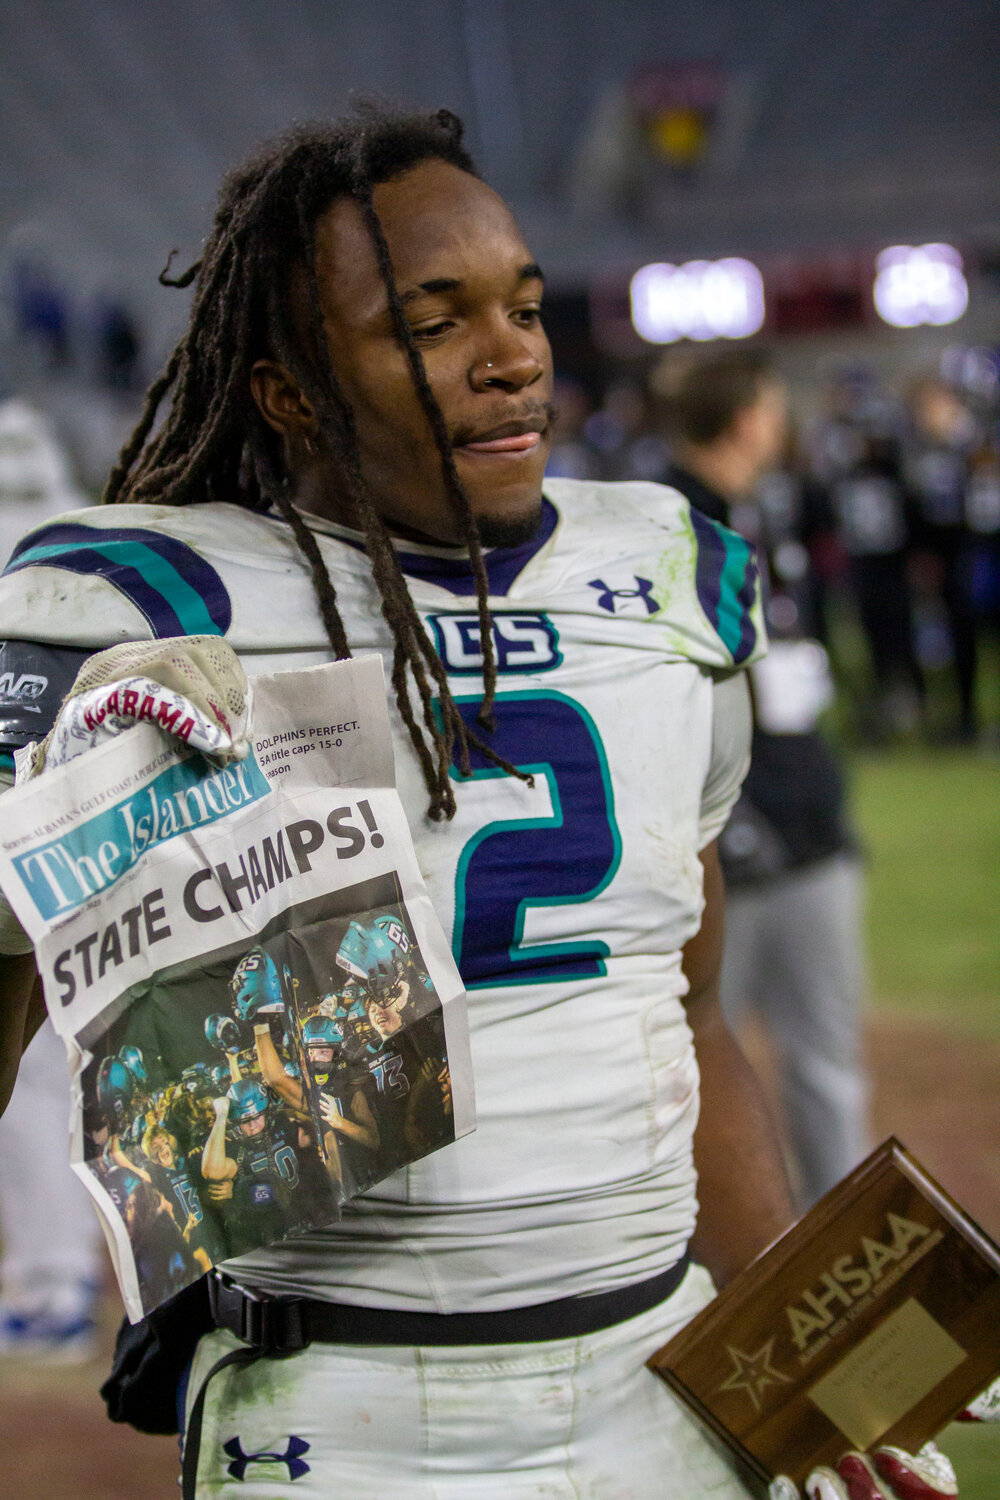 Class 5A State Championship MVP Ronnie Royal soaks in the 21-14 win over Ramsay in Tuscaloosa Thursday night. With 245 all-purpose yards and 2 touchdowns, Royal also added 4 tackles and a one-handed interception to highlight a stout defensive effort.